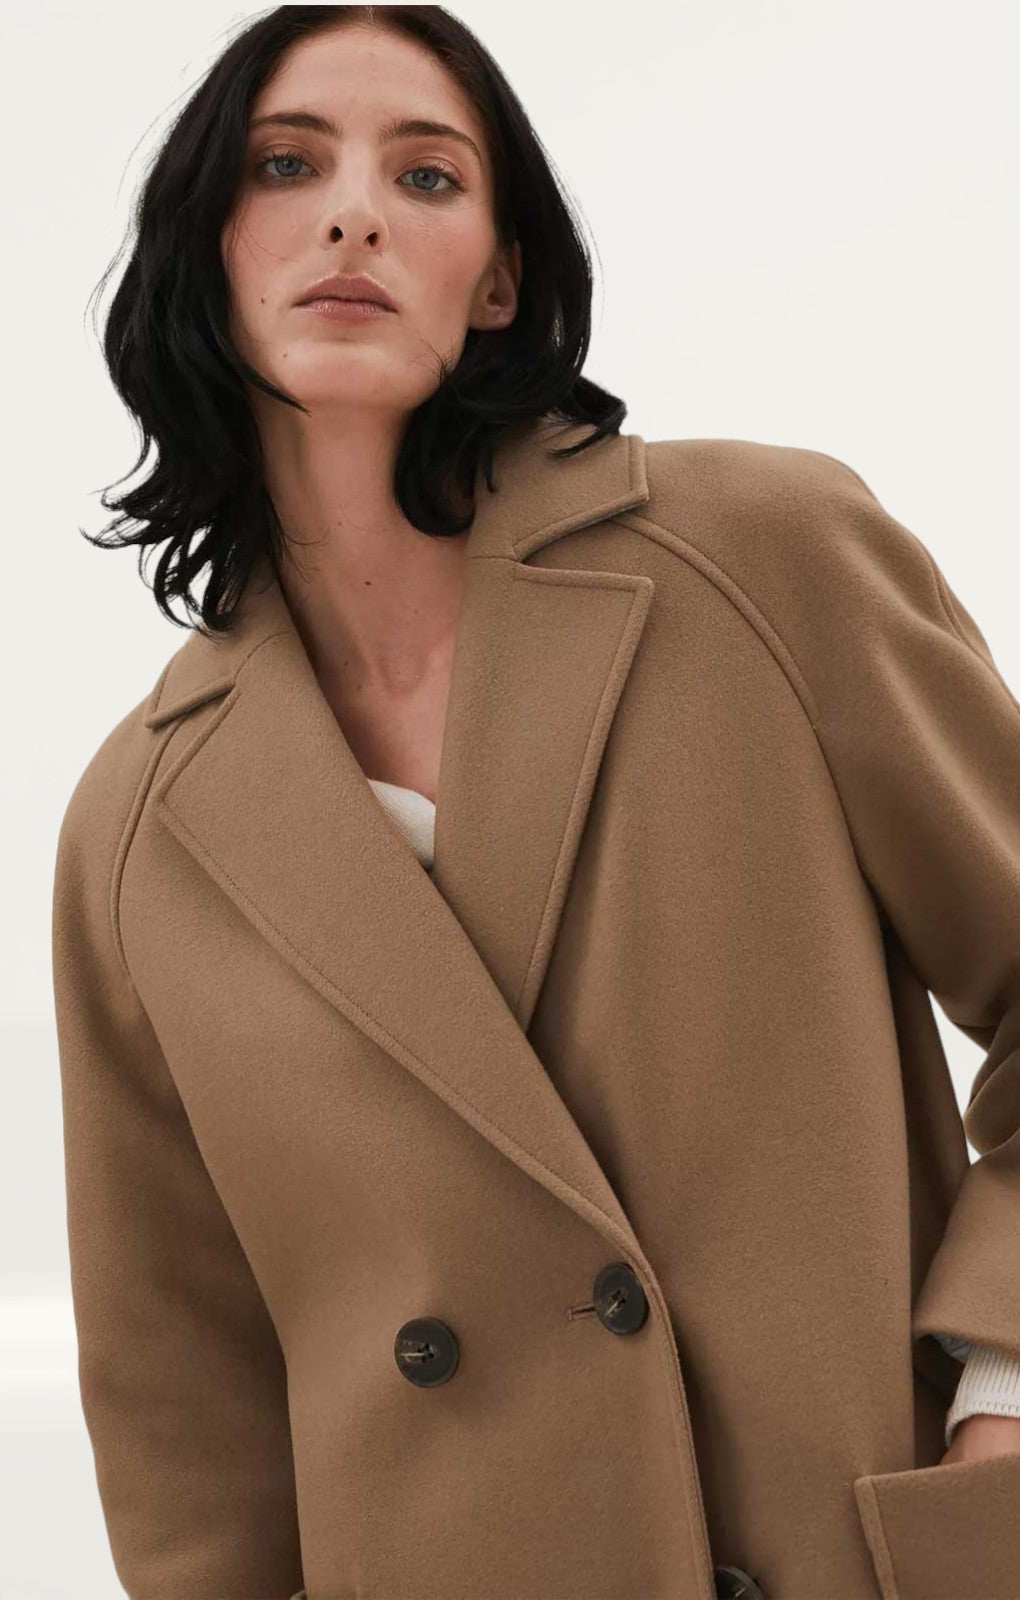 M&S Wool Double Breasted Coat product image